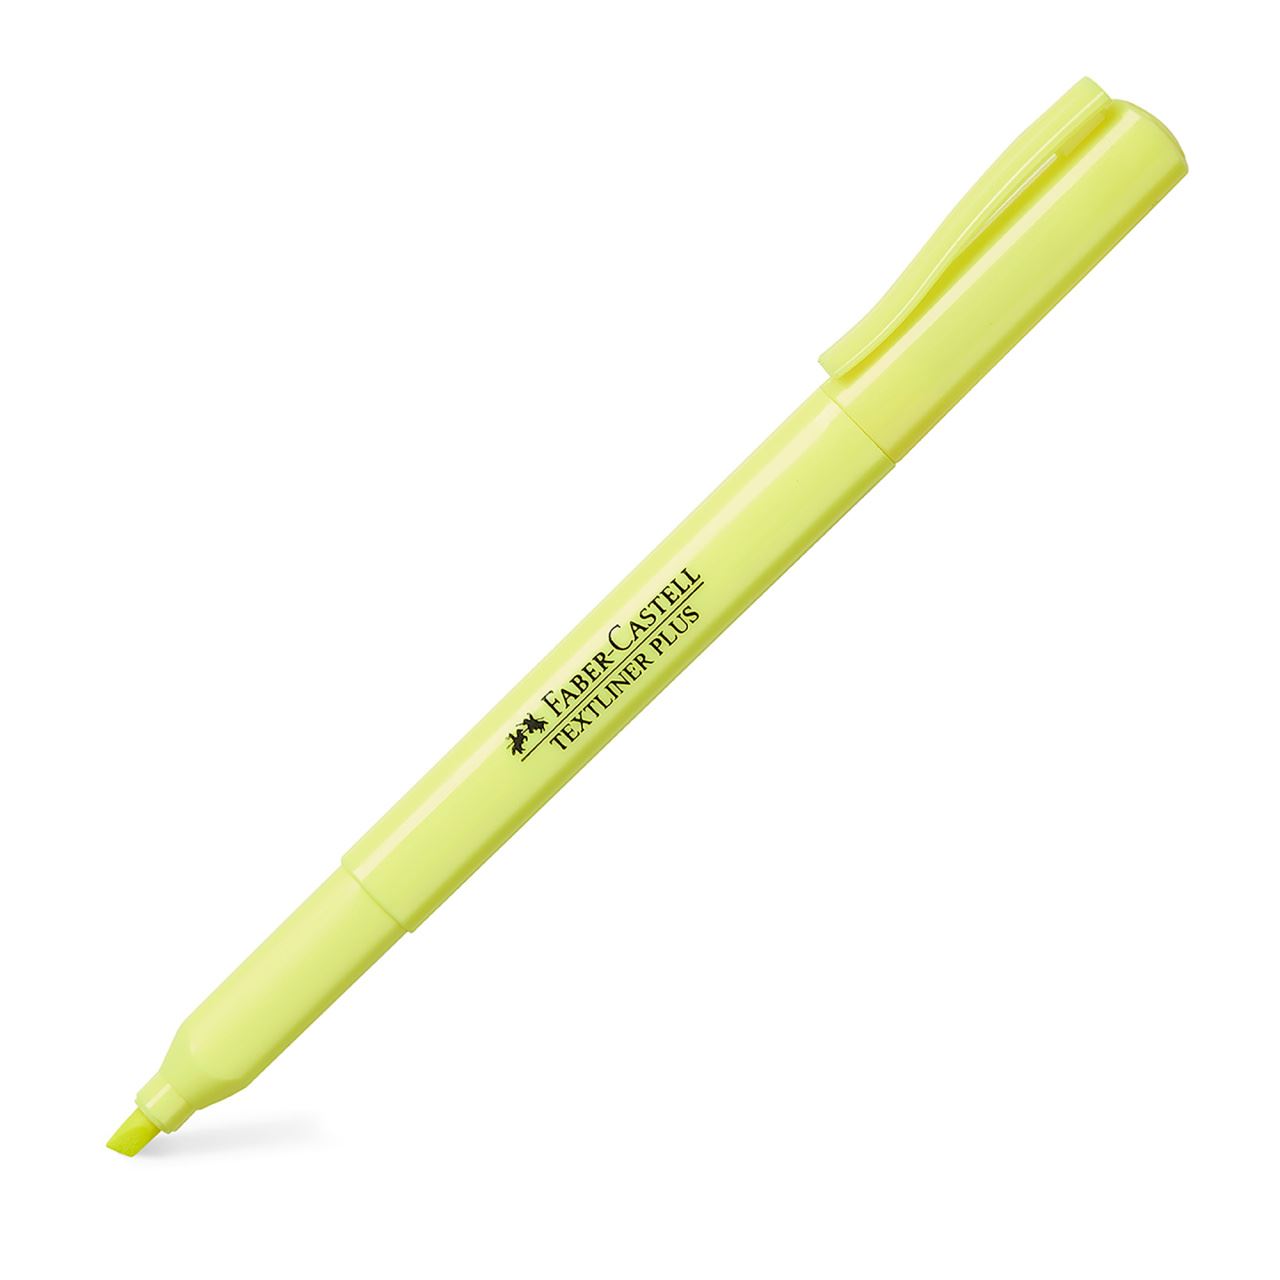 Faber-Castell - Highlighter Textliner Plus yellow